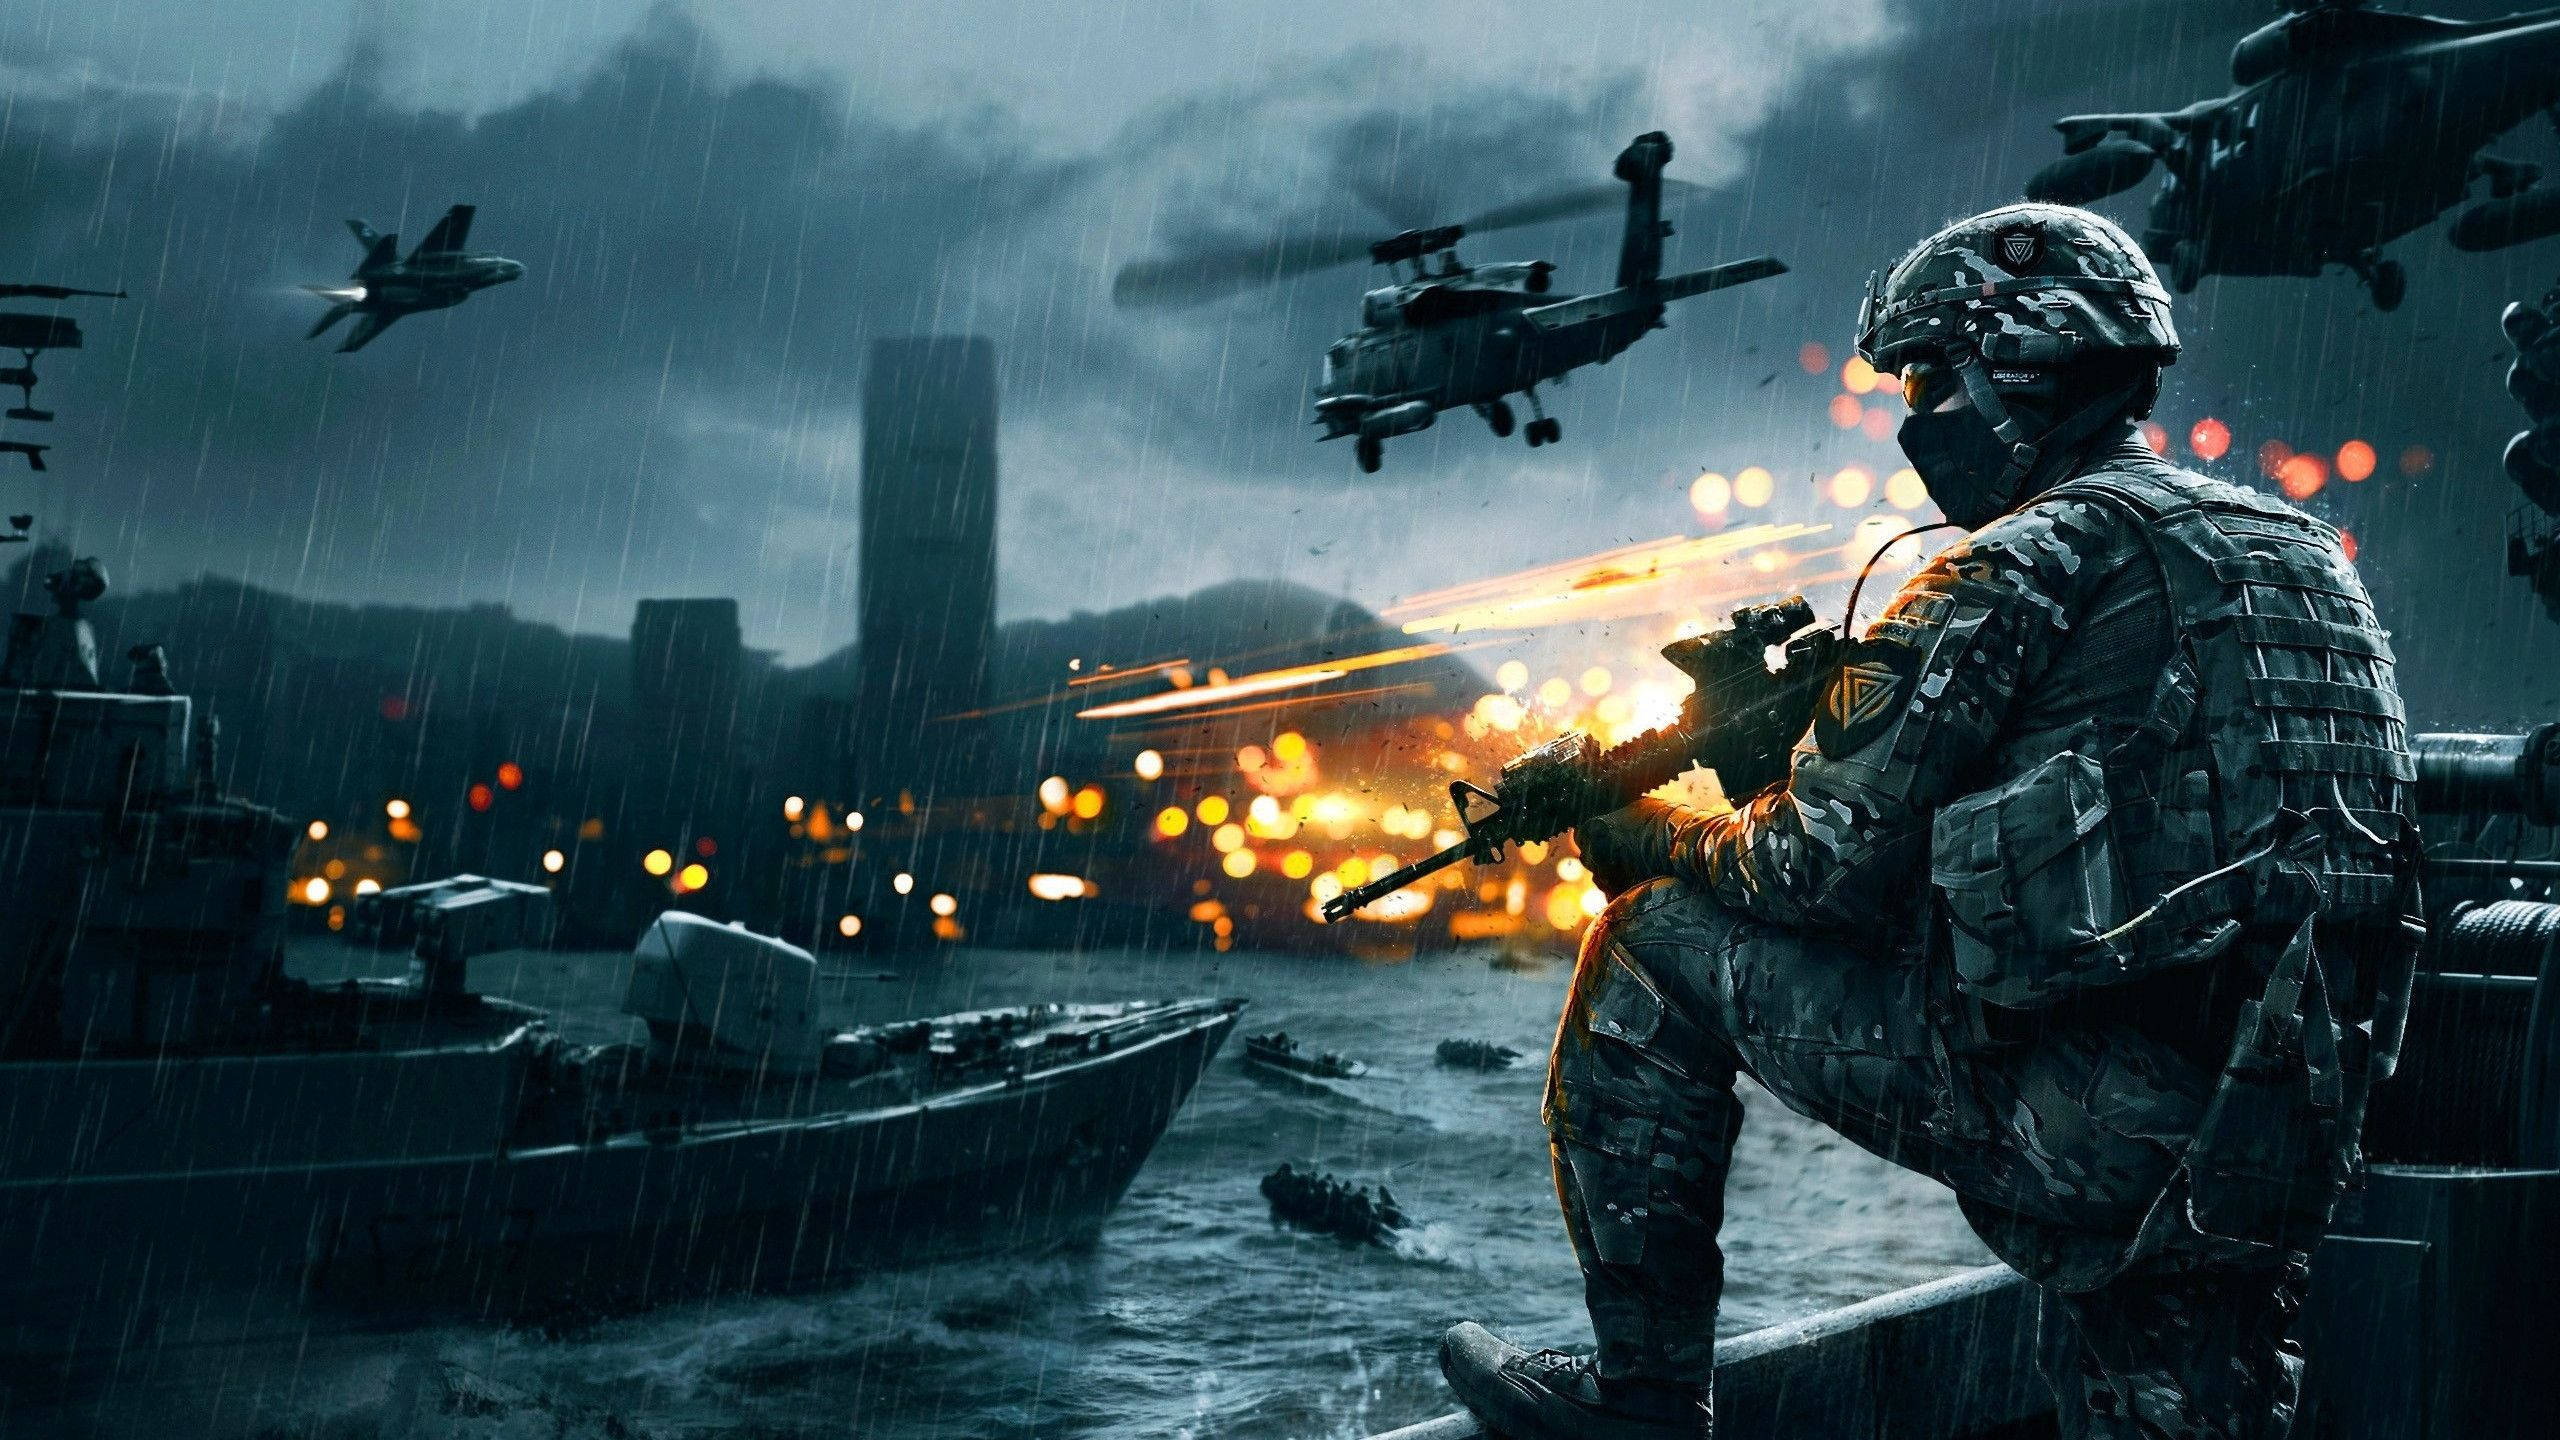 2560x1440 Gaming Battlefield 4 Video Game